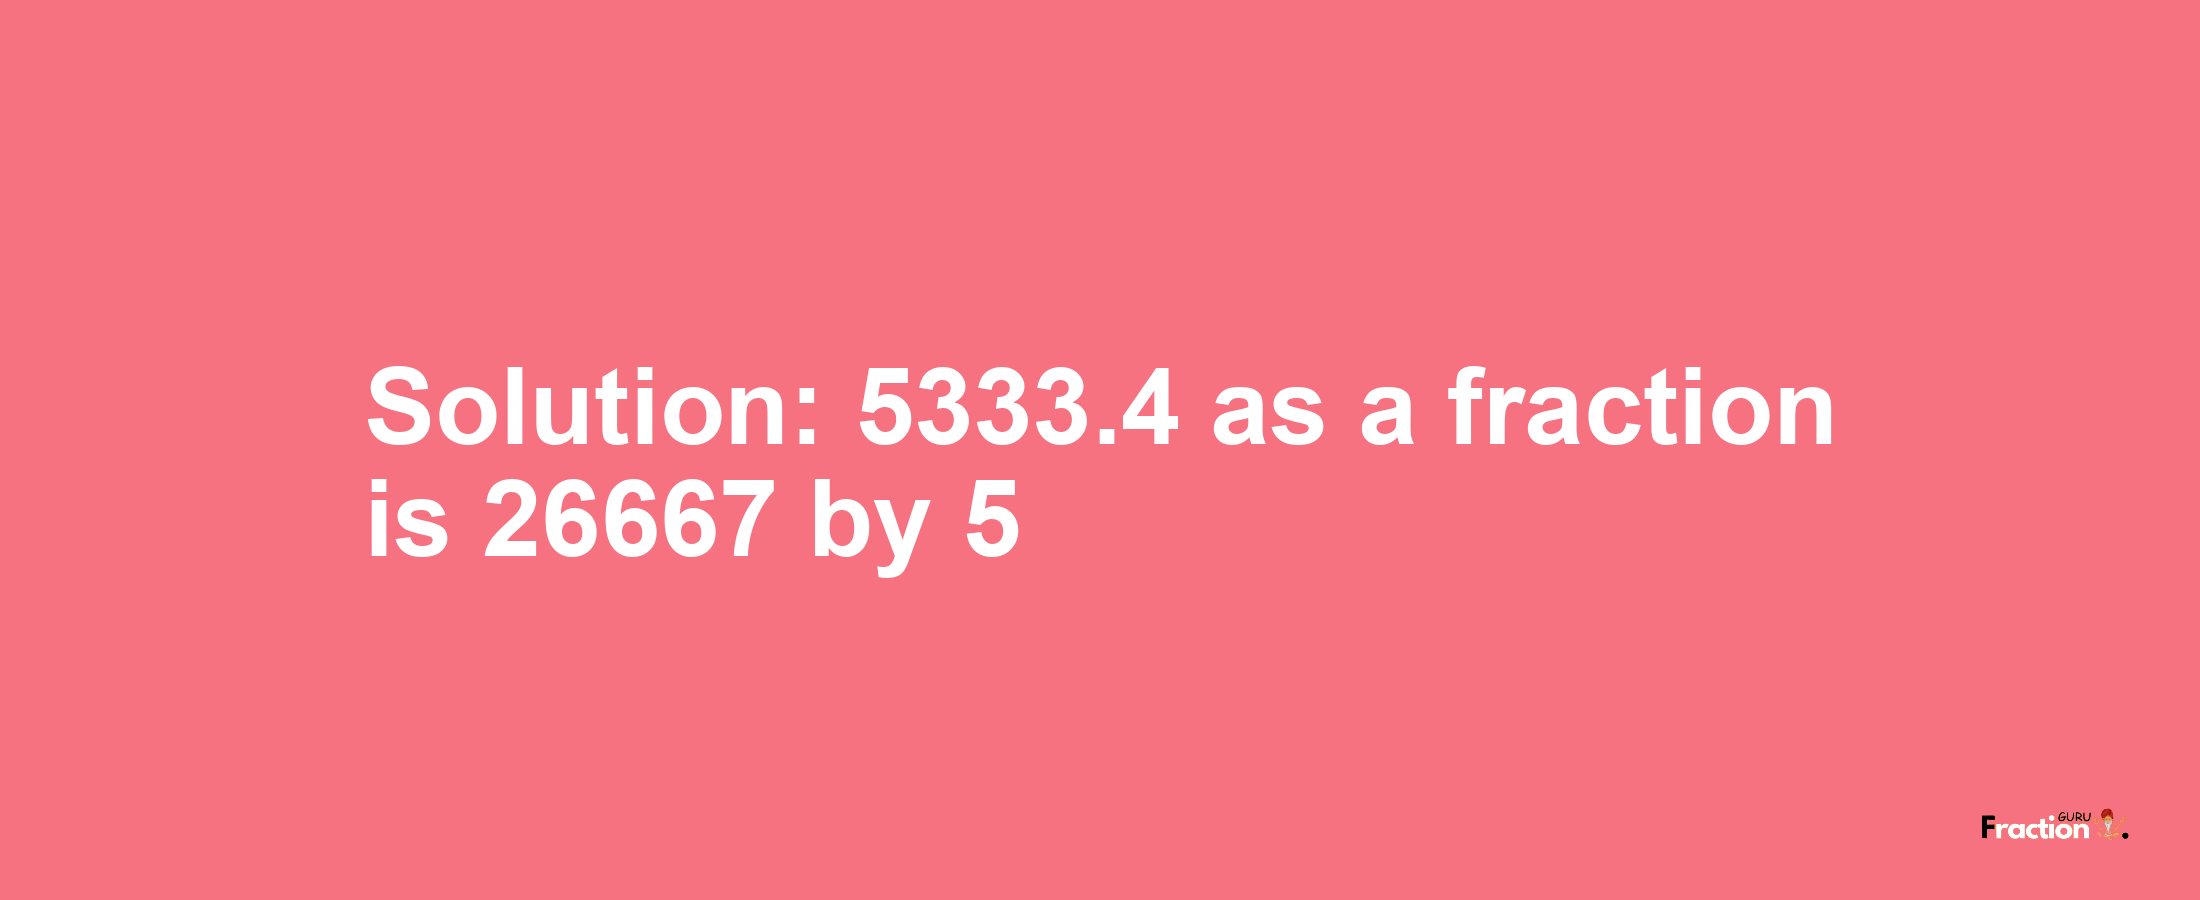 Solution:5333.4 as a fraction is 26667/5